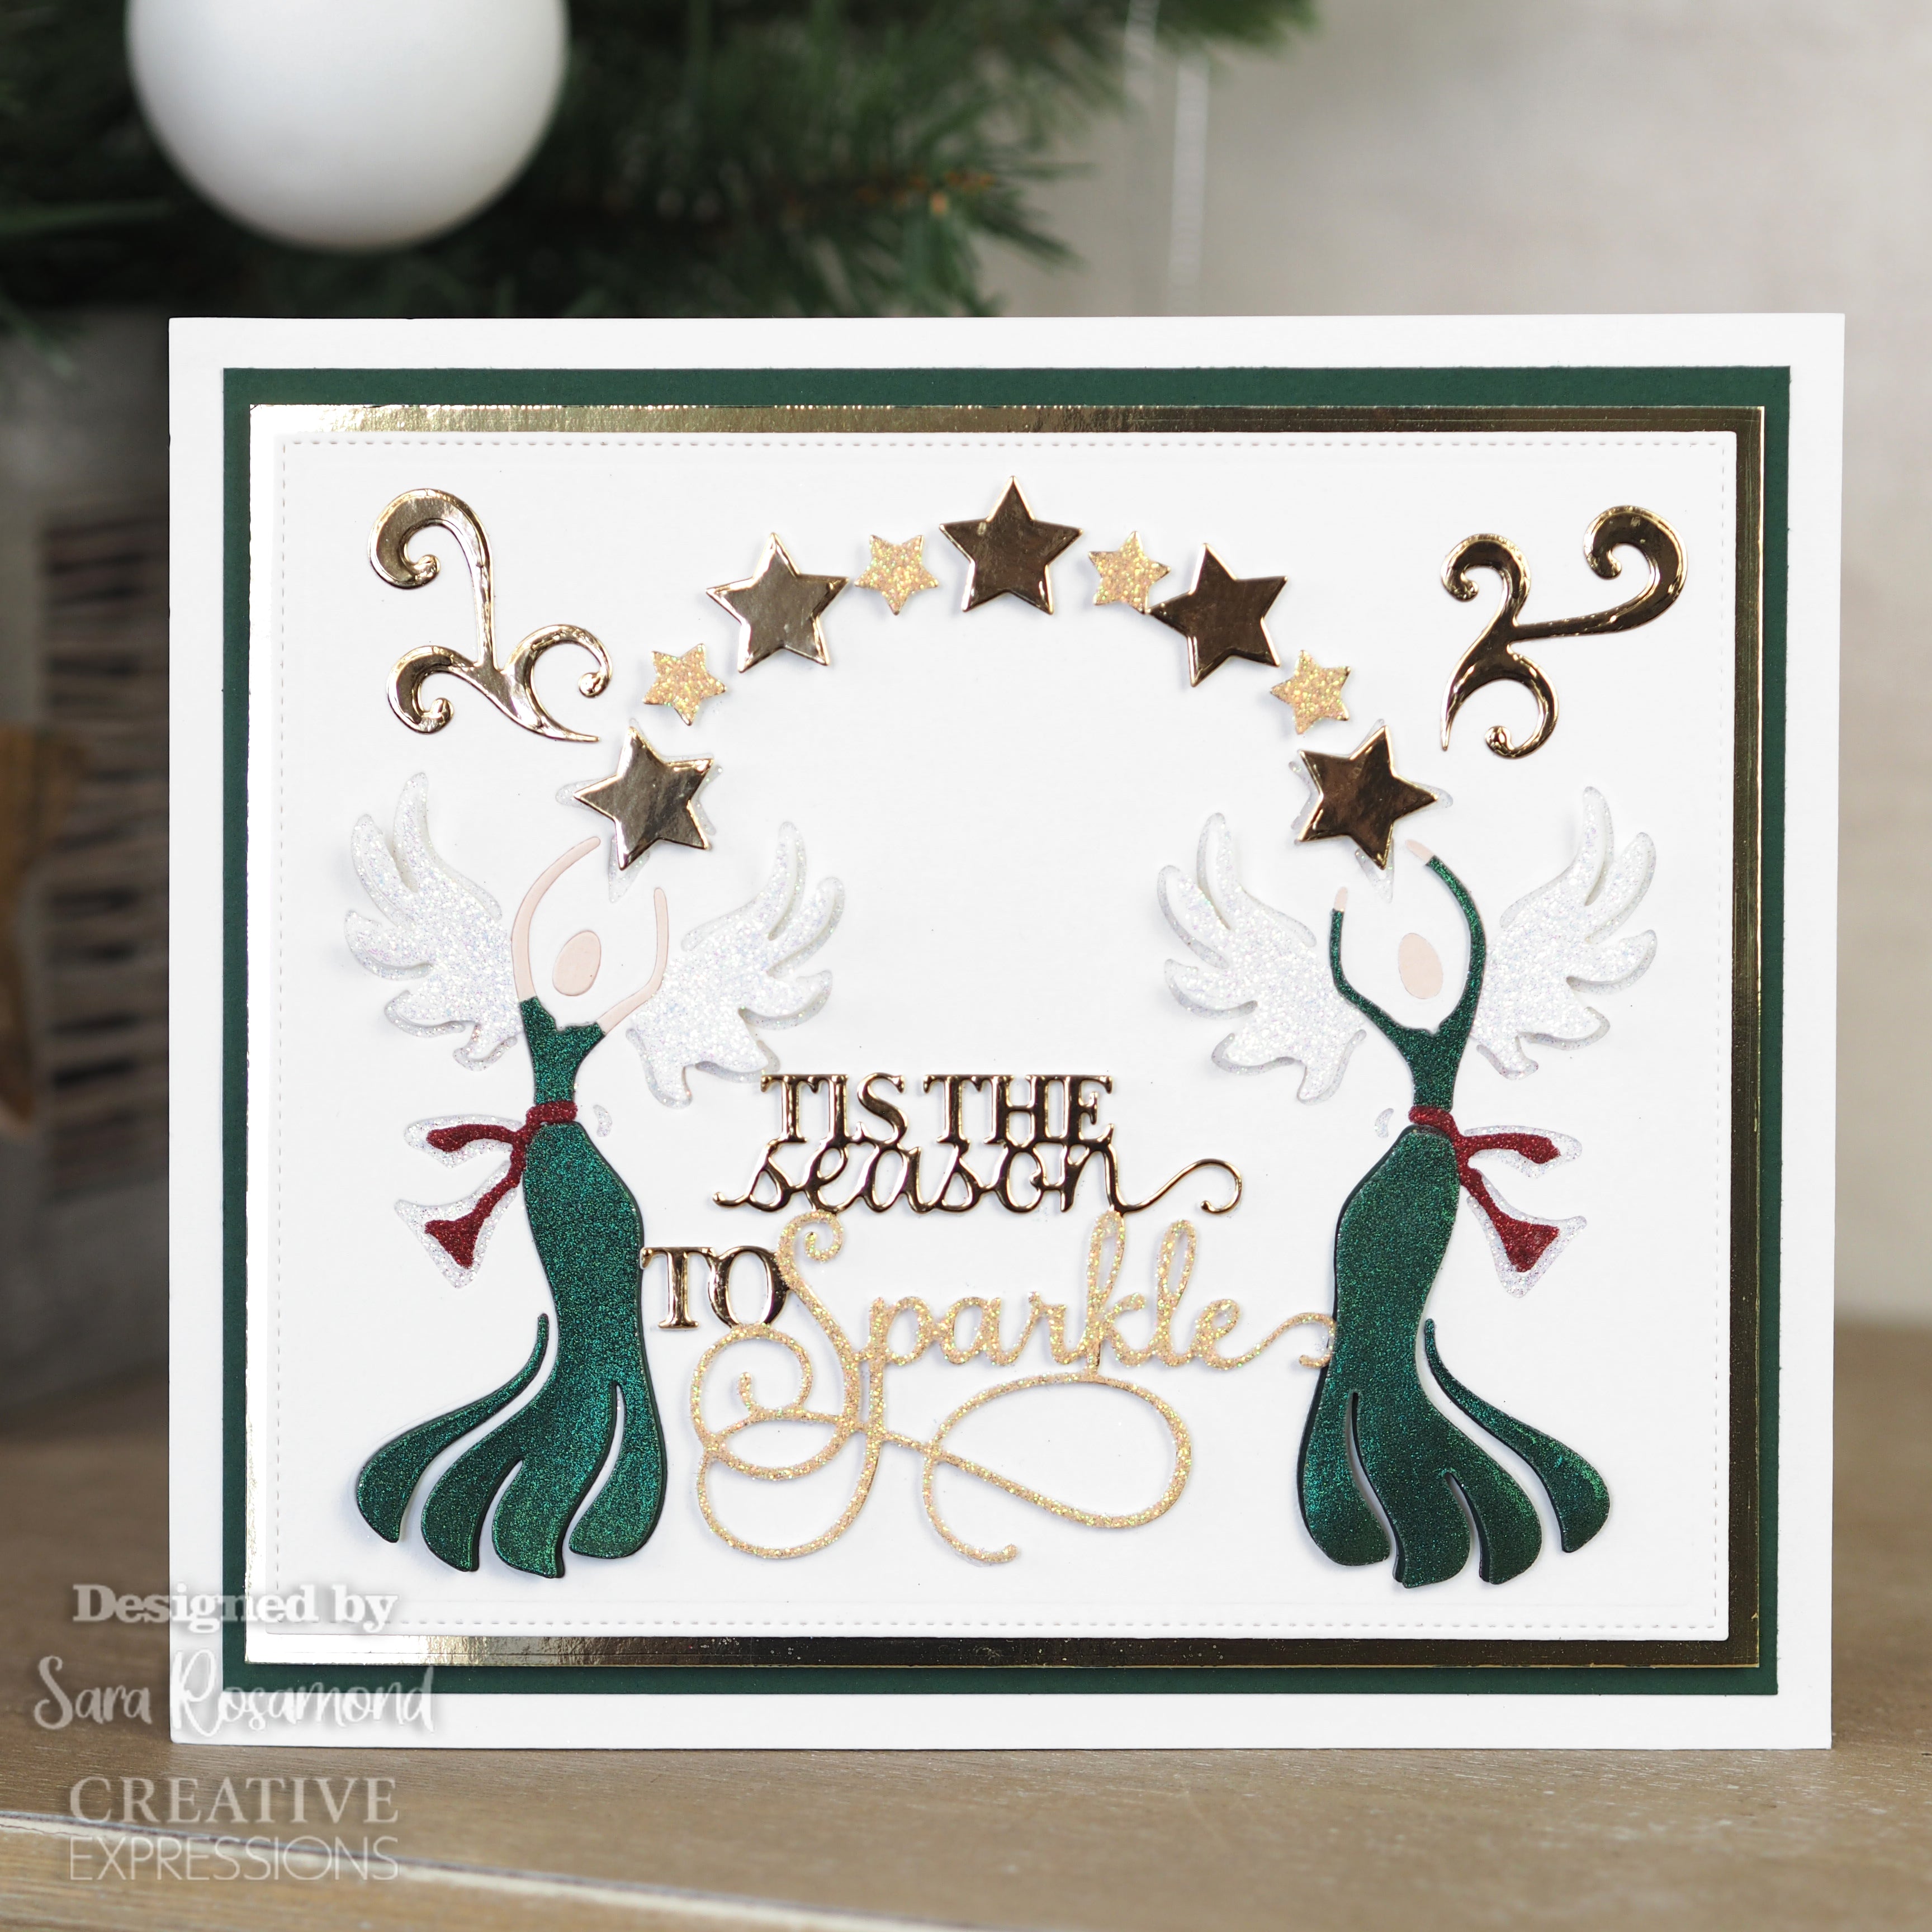 Creative Expressions Sue Wilson Mini Expressions Tis The Season To Sparkle Craft Die